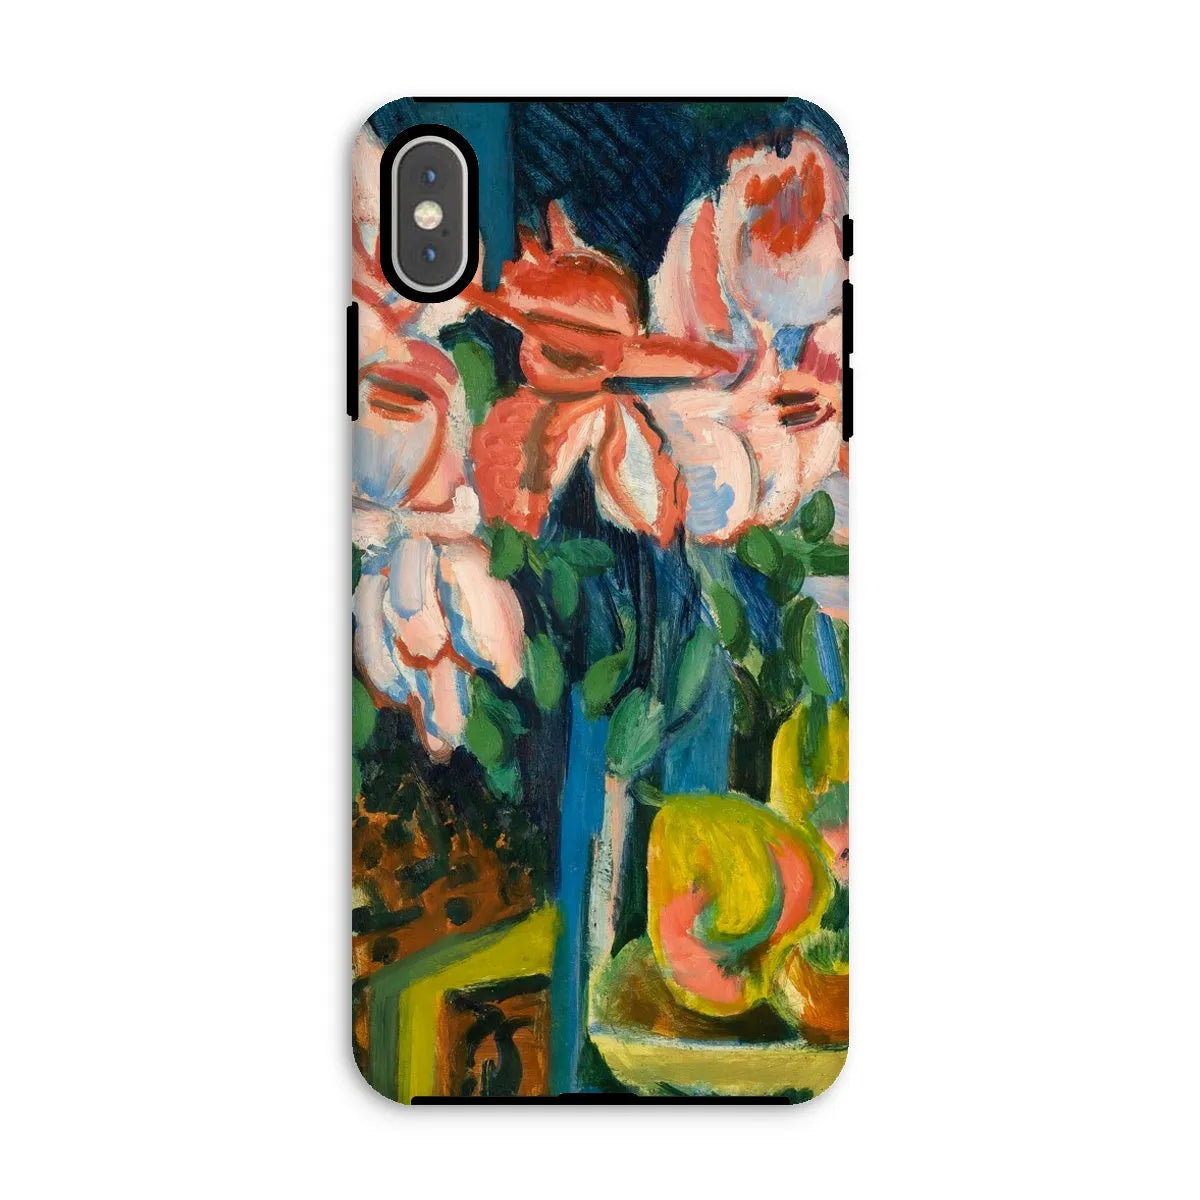 Pink Roses - Expressionist Phone Case - Ernst Ludwig Kirchner - Iphone Xs Max / Matte - Mobile Phone Cases - Aesthetic